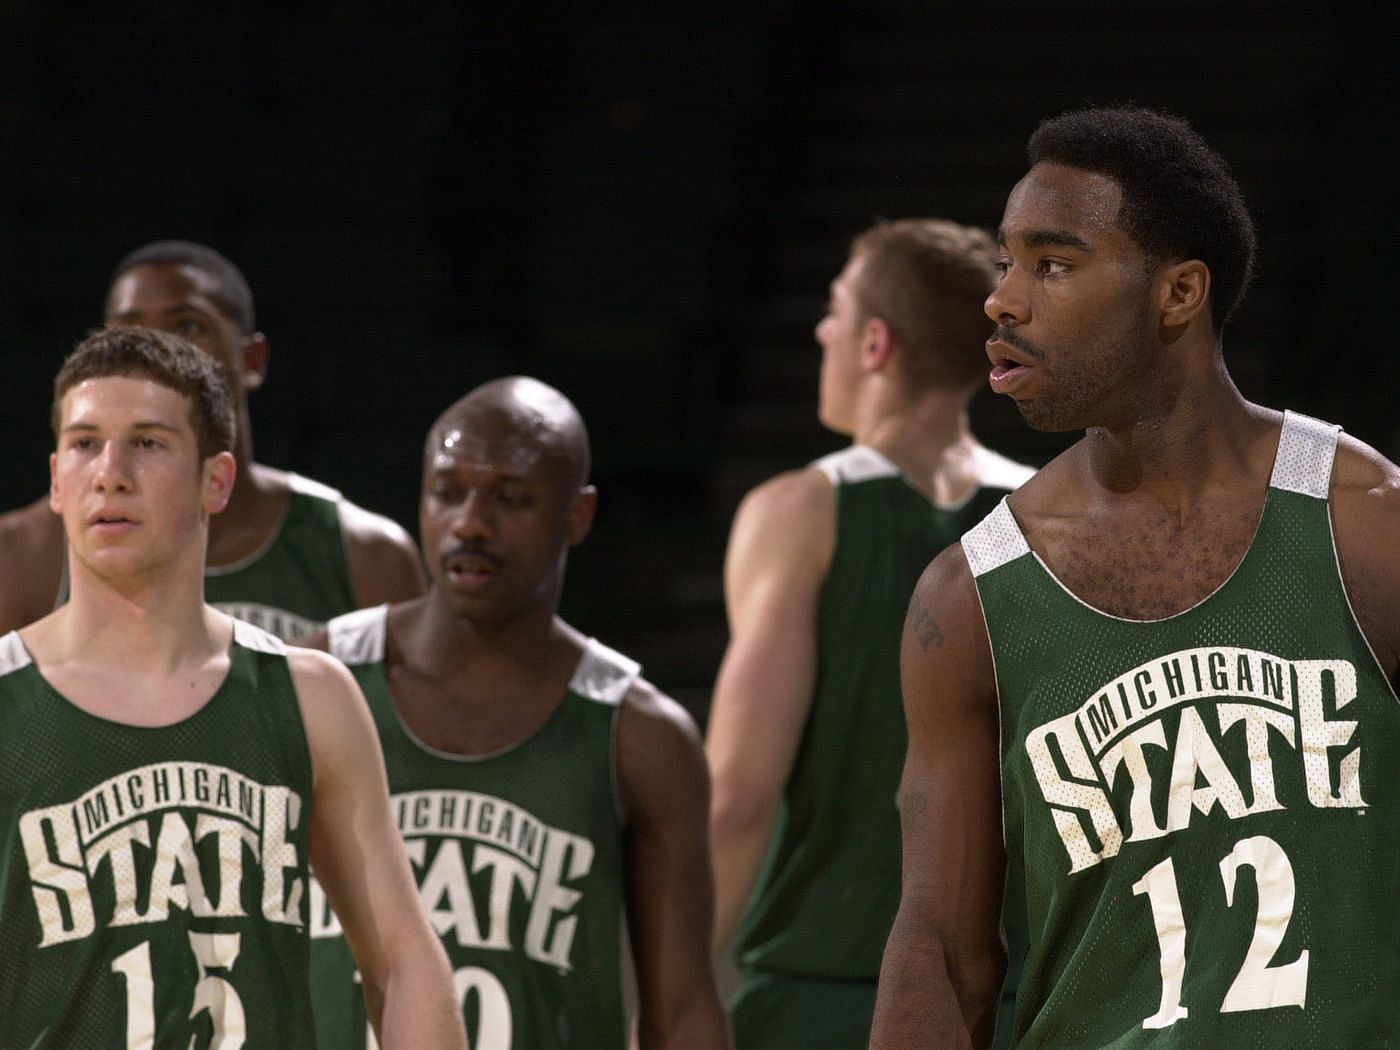 Mat Ishbia (left) played for the Michigan State Spartans from 1999 to 2002 [Source: SB Nation]